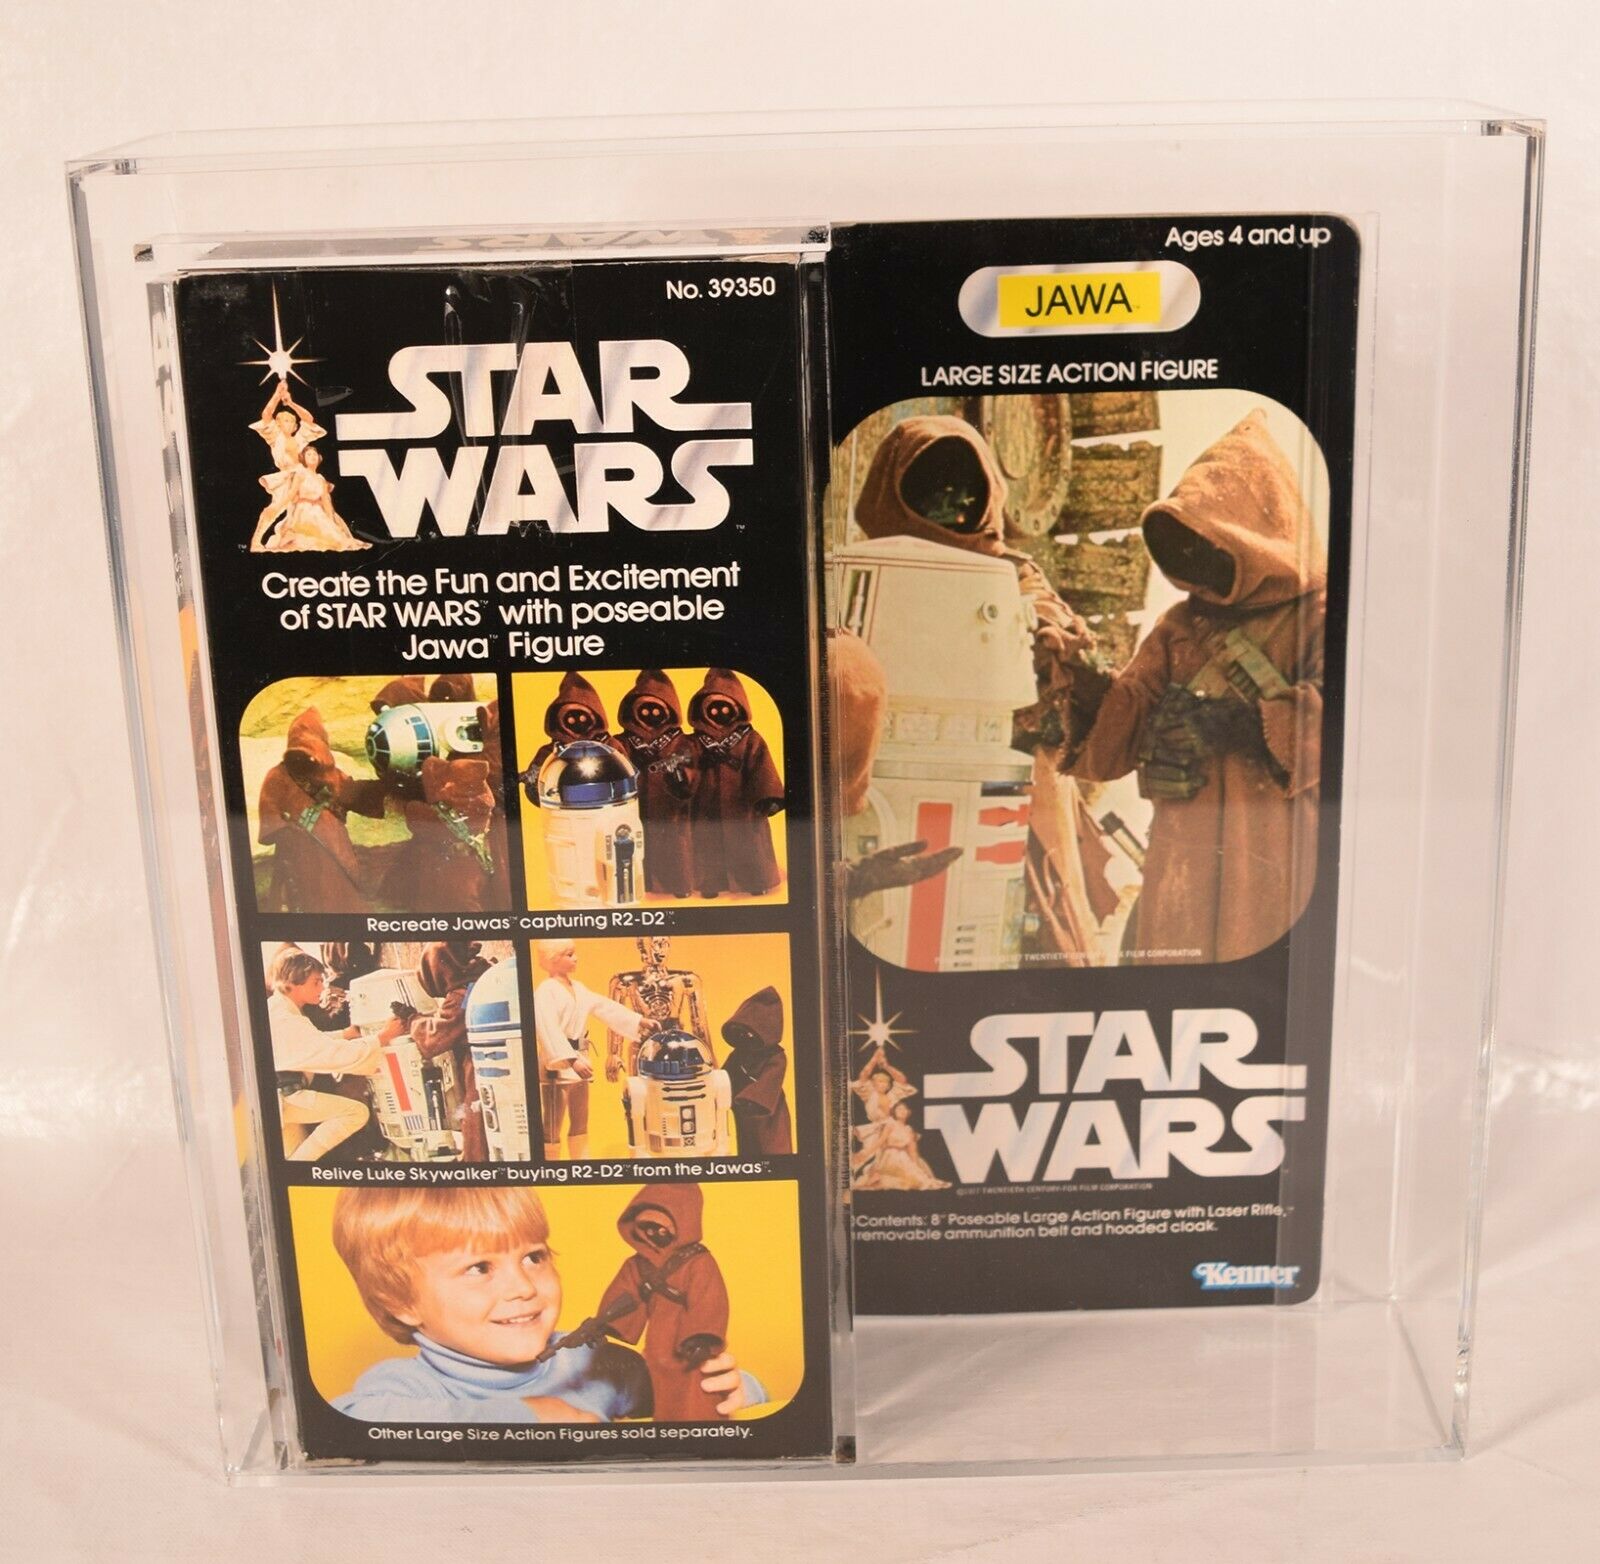 Kenner Star Wars action figures - Wikipedia